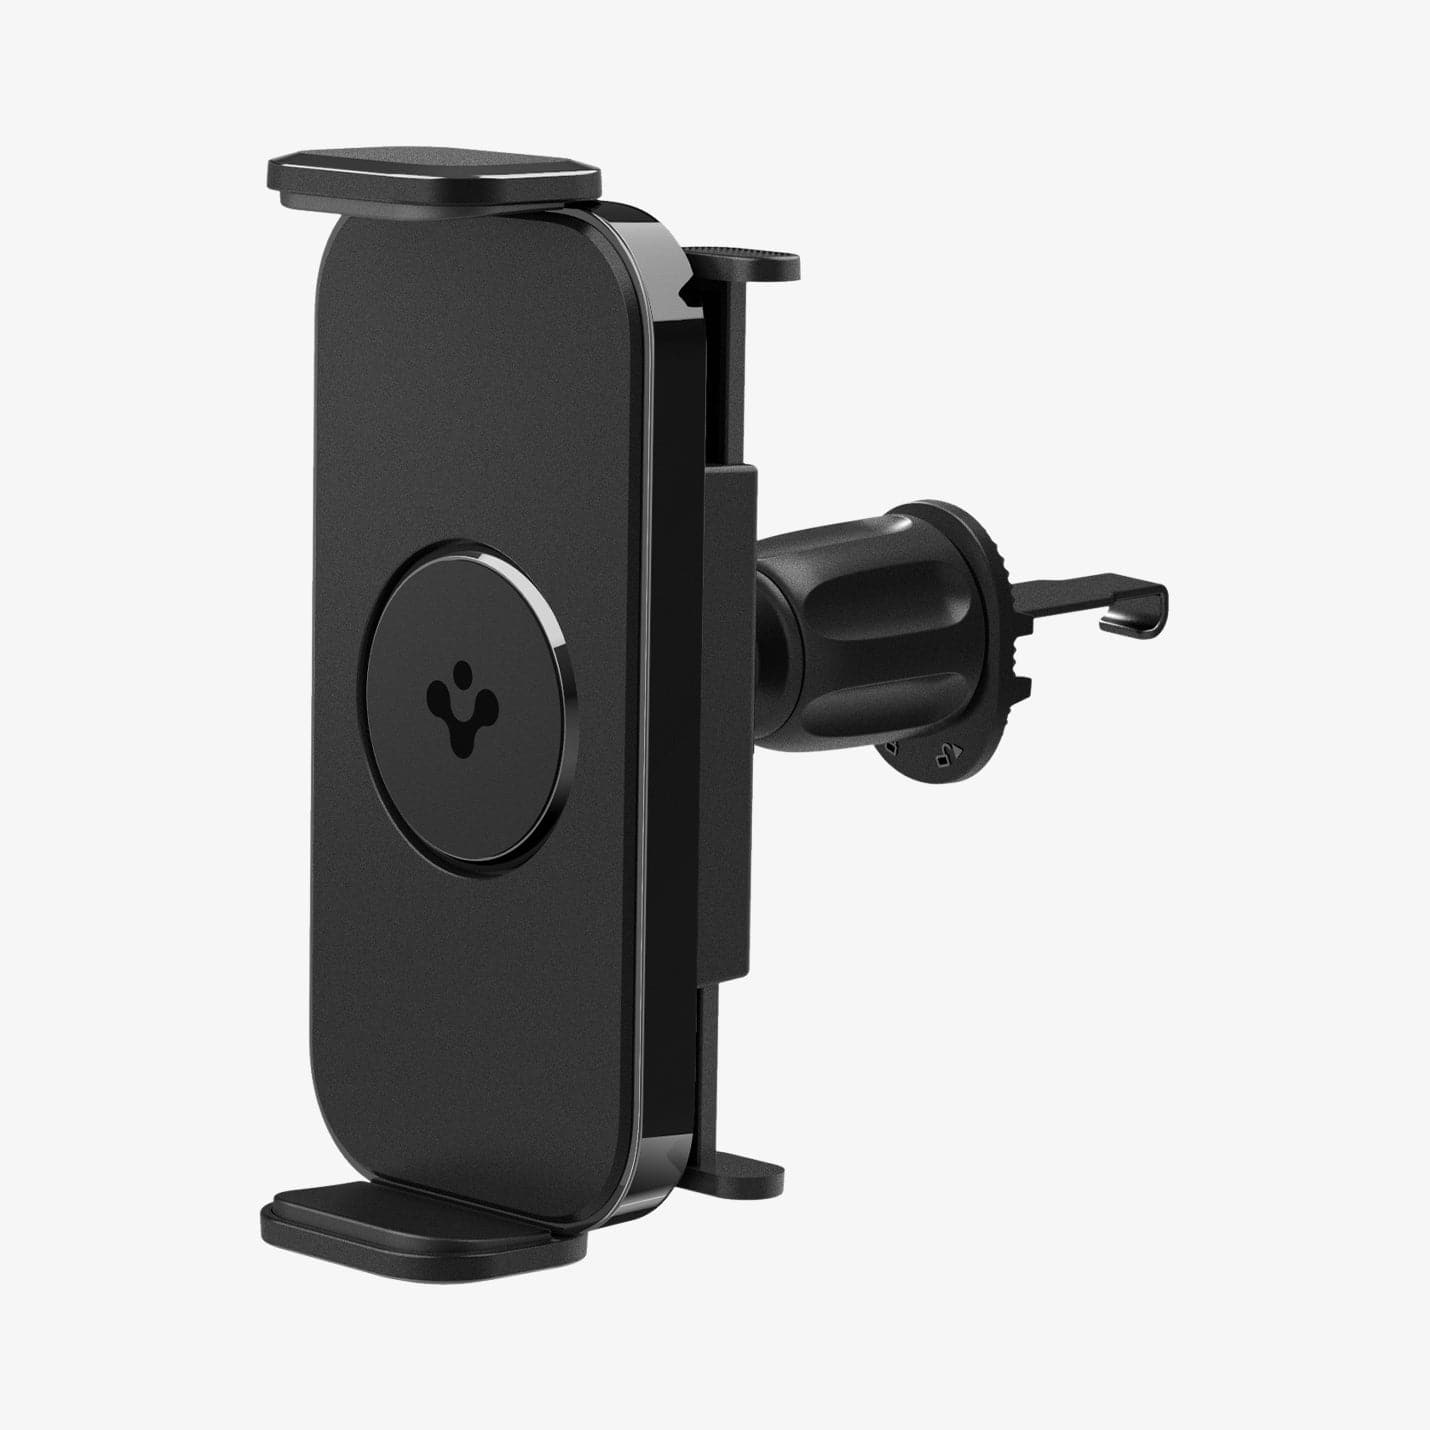 ACP04278 - GTS12 Galaxy Fold Car Mount in black showing the front and partial side with mount adjusted vertically